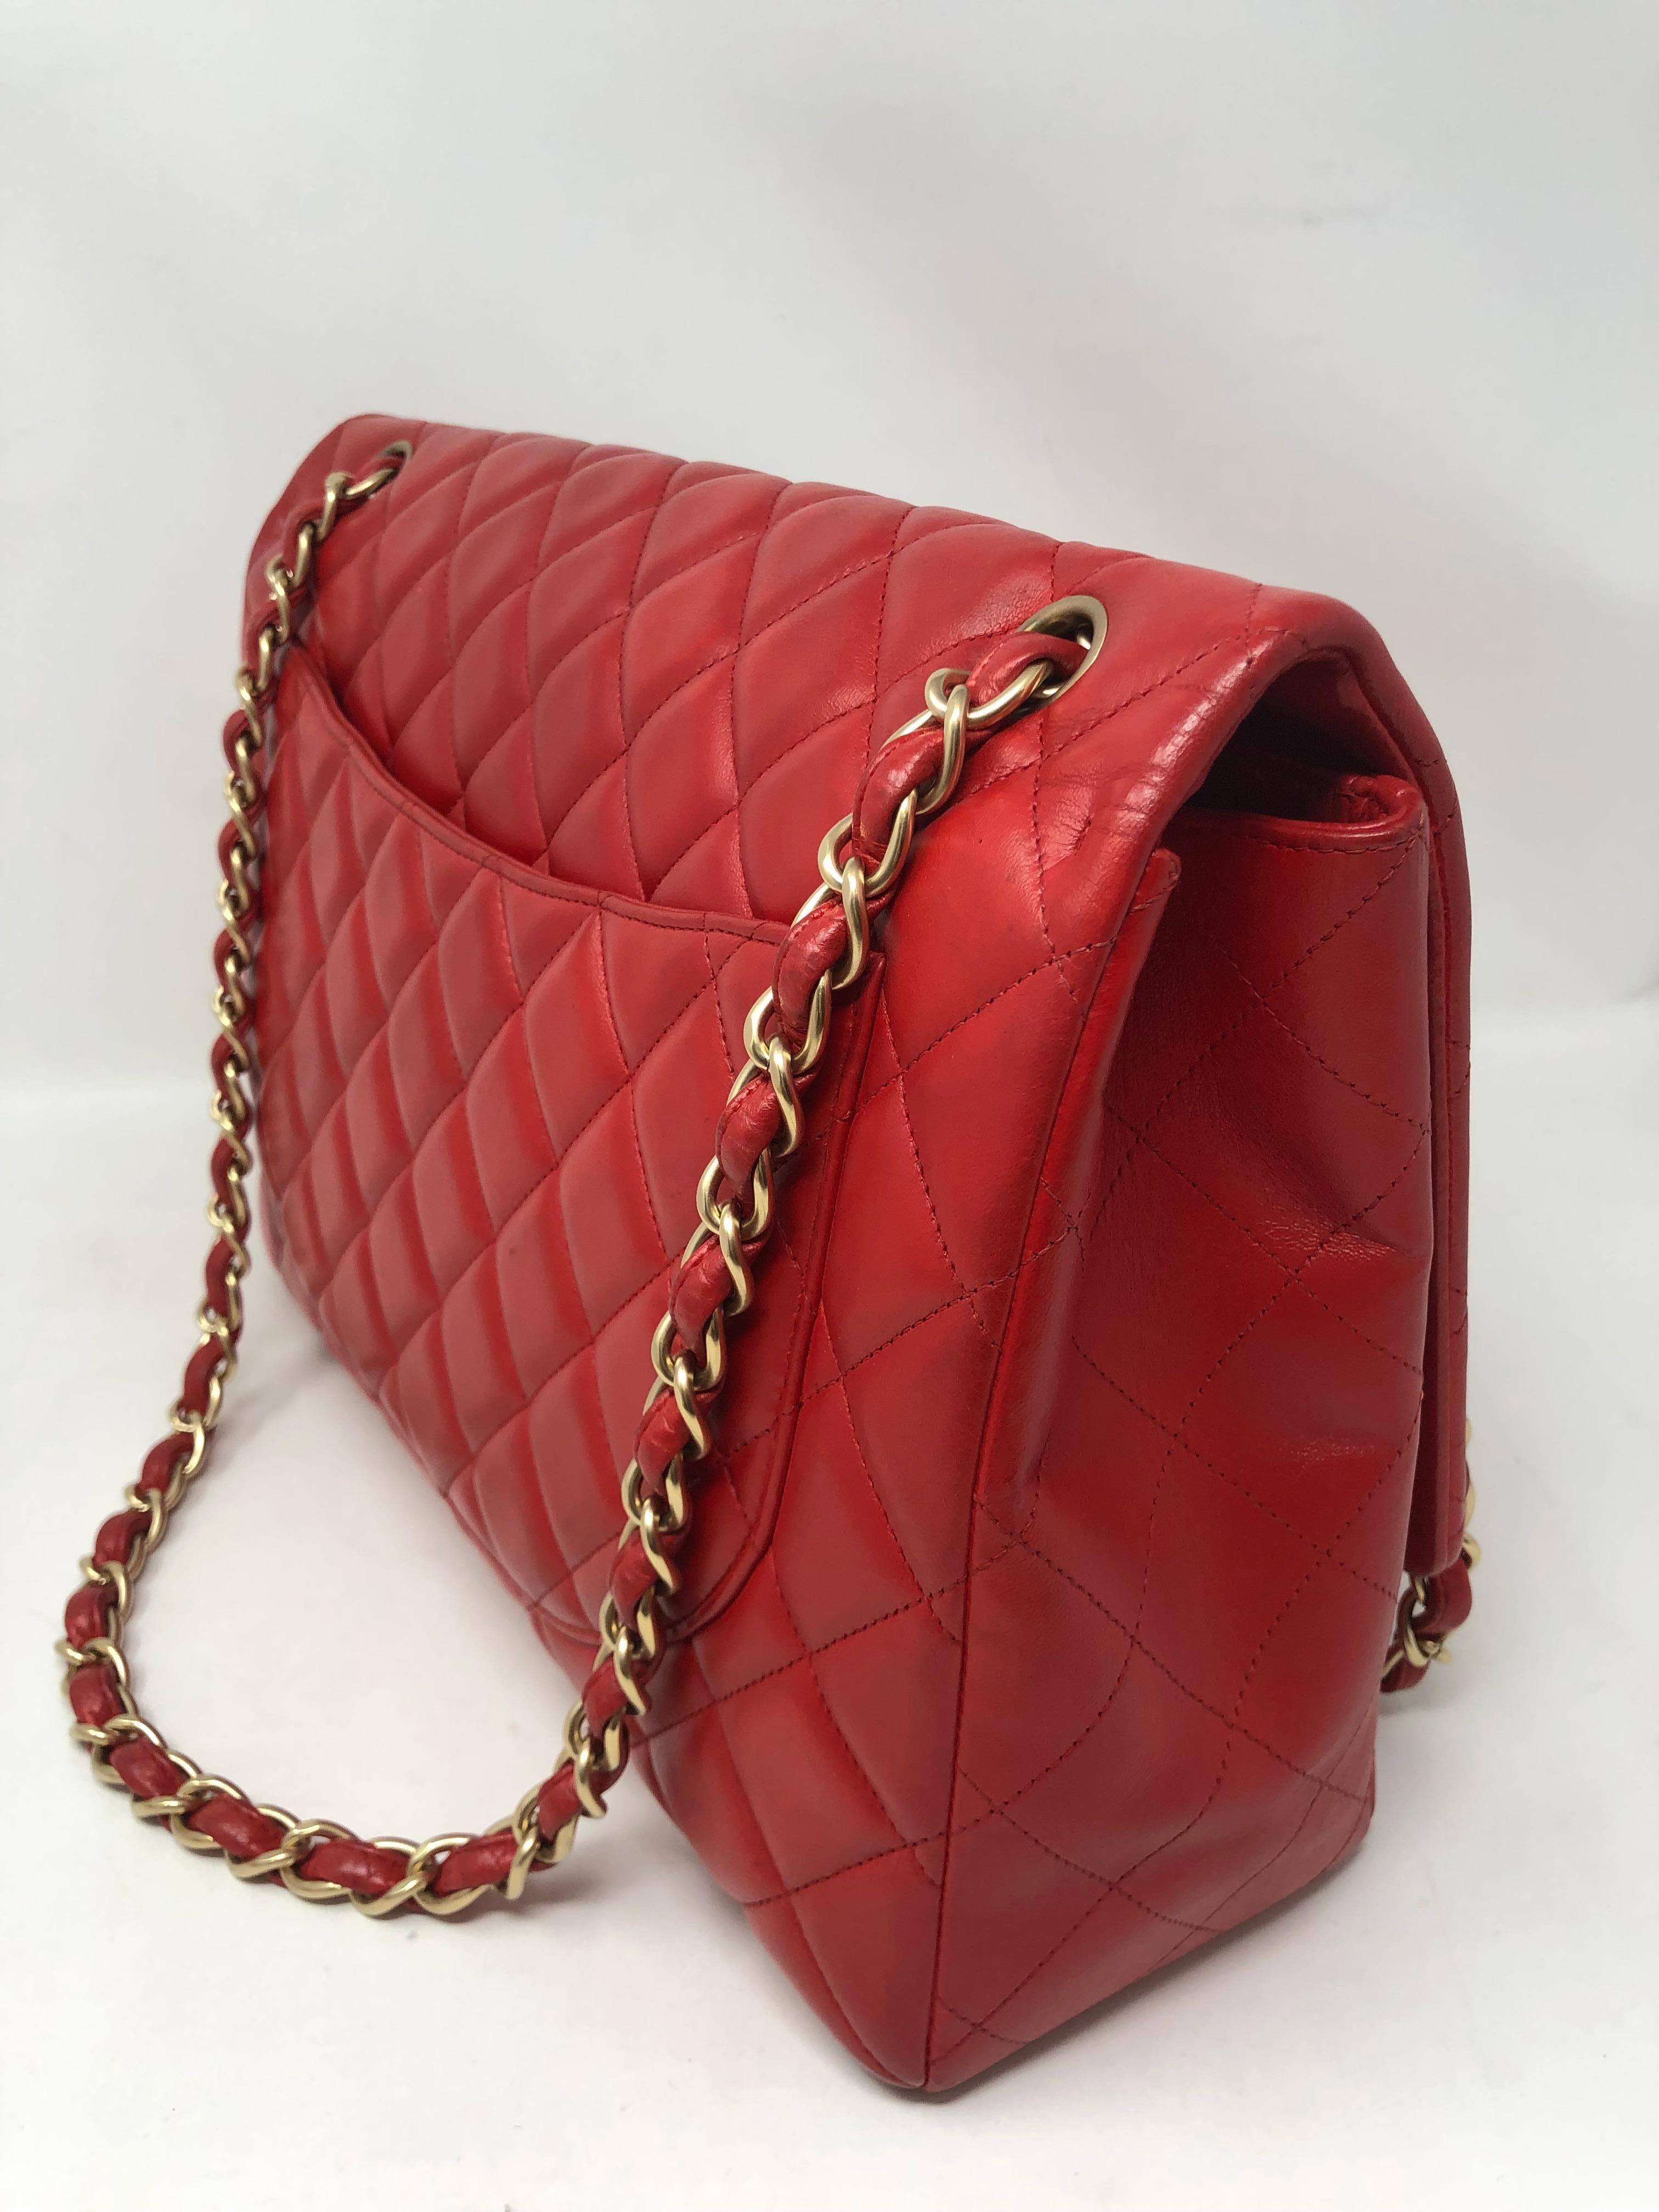 Chanel Red Maxi Bag 1